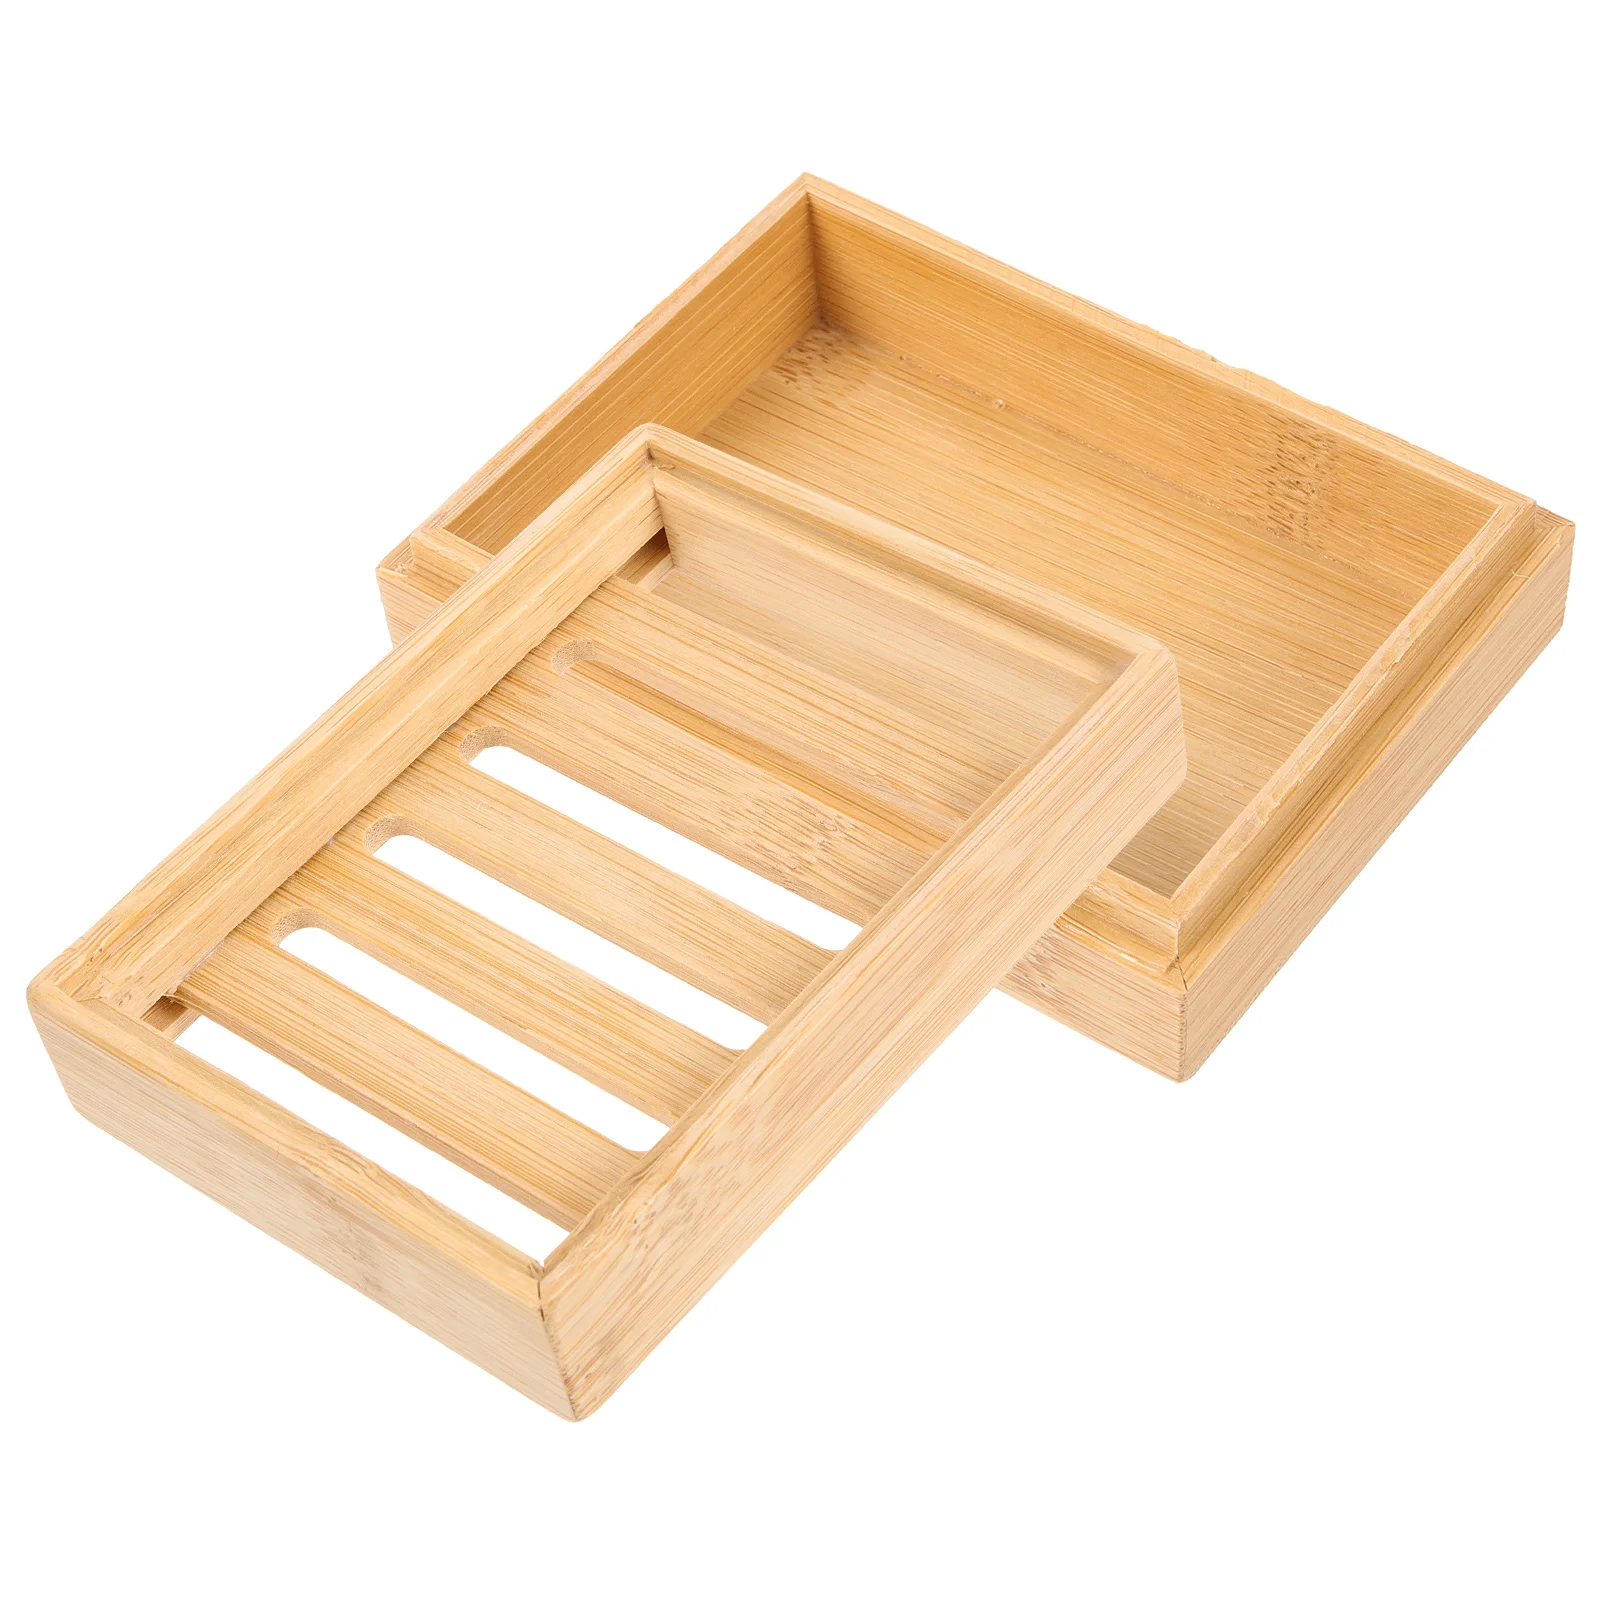 

Bamboo Vintage Soap Dish Bar Holder Draining Container Stand Sink Bathroom Tray